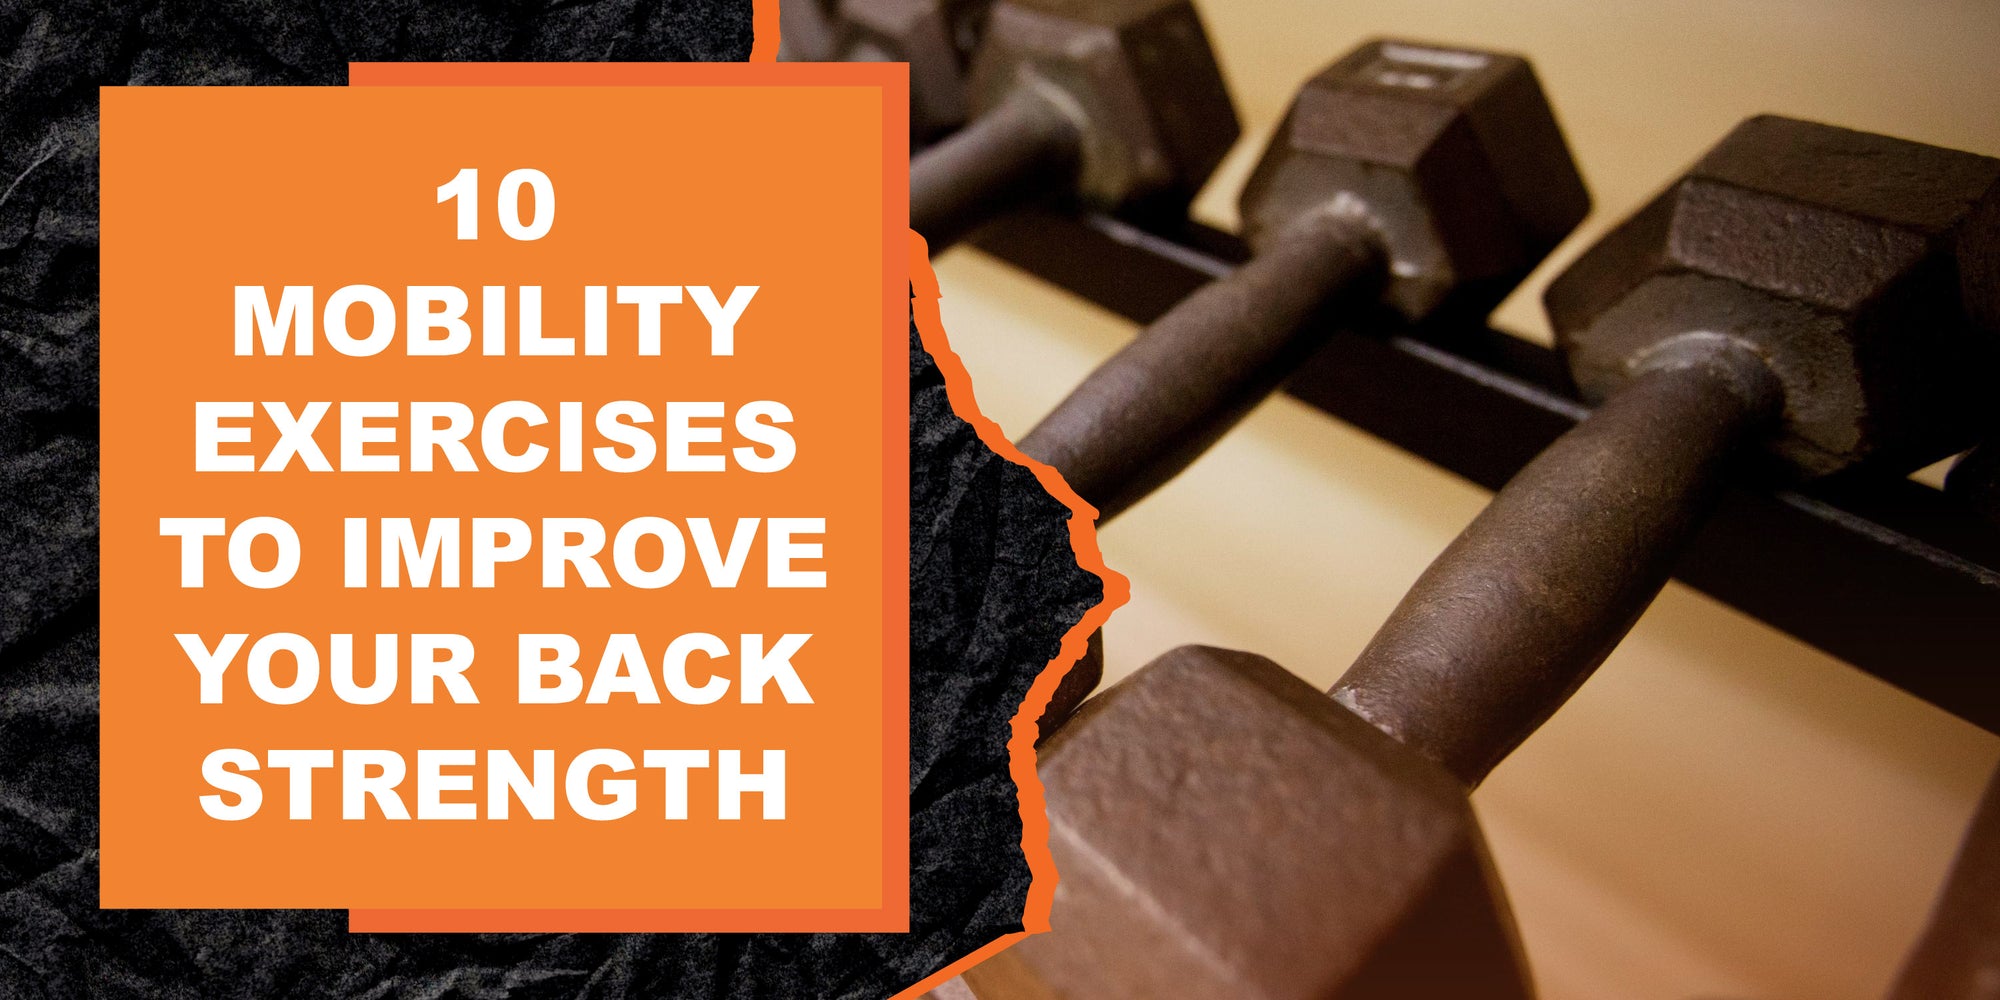 10 Mobility Exercises to Improve Your Back Strength